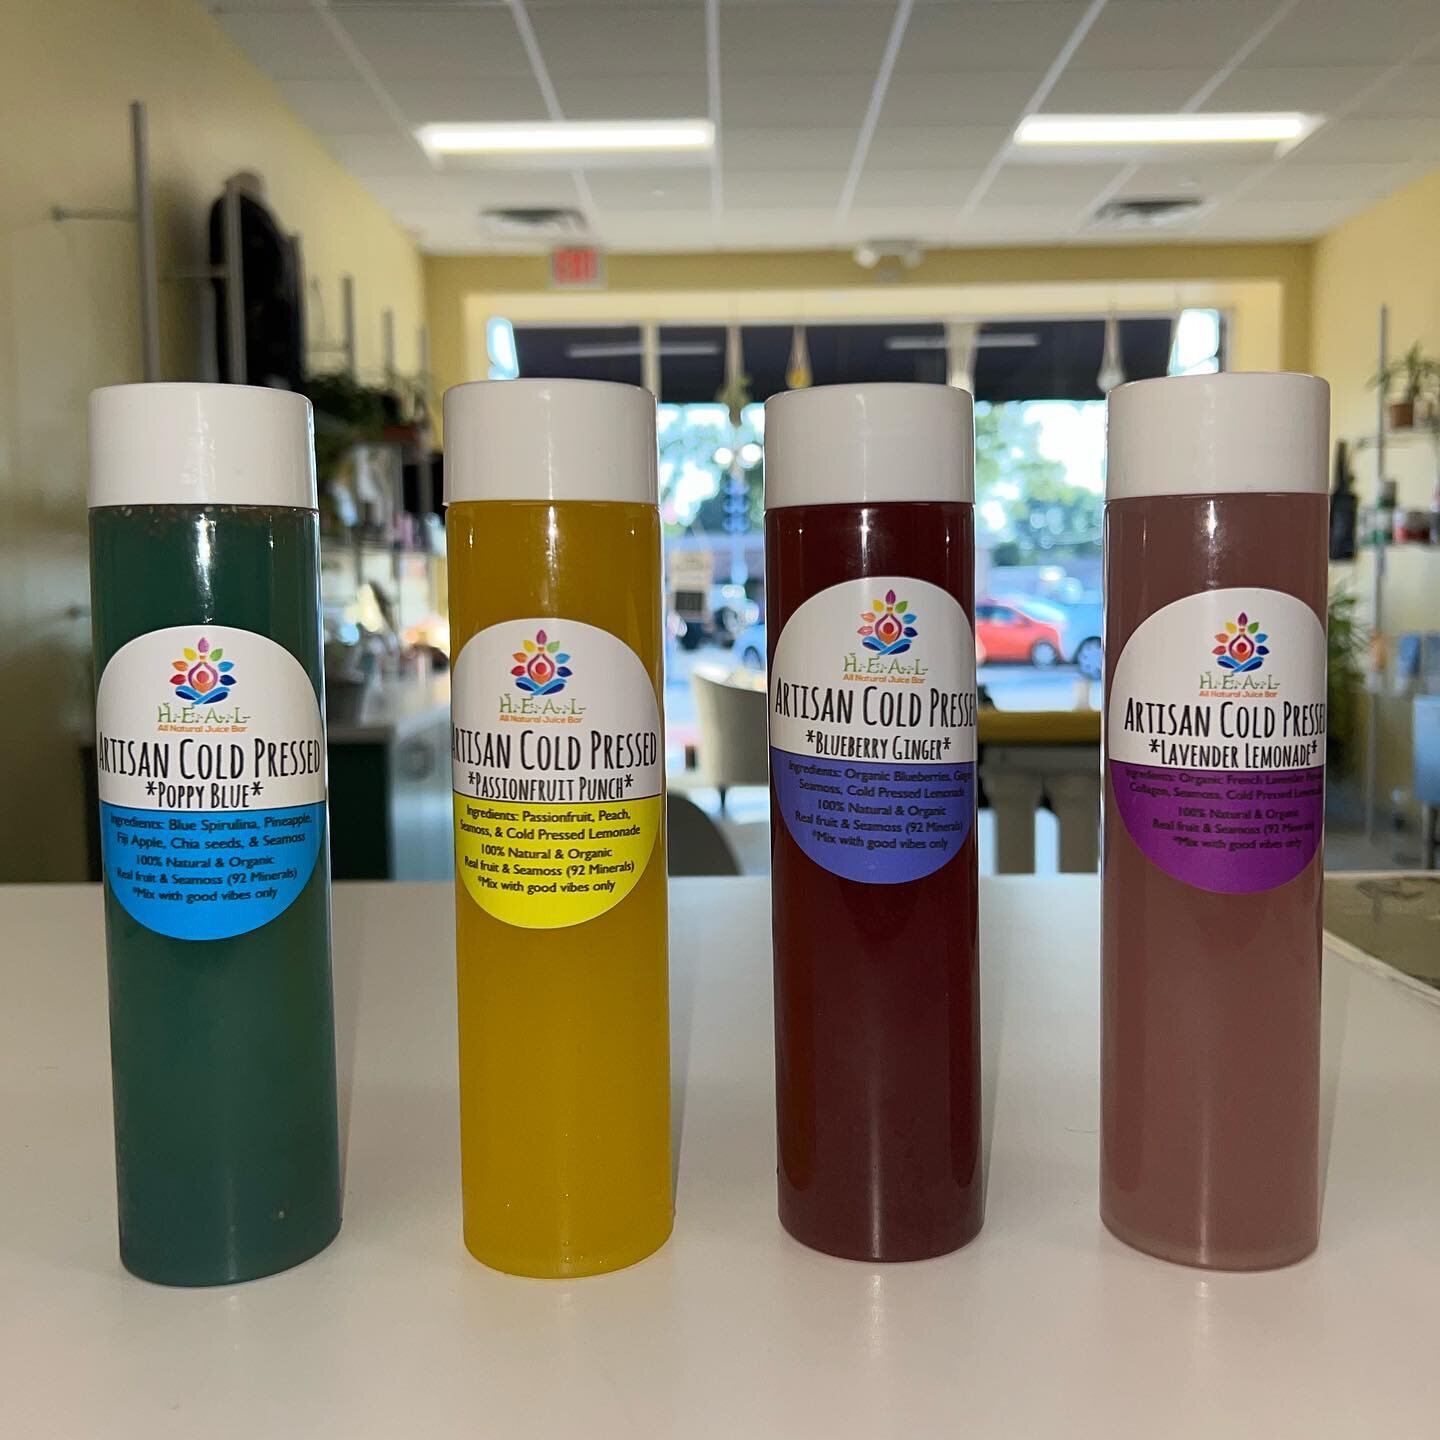 Calling all juice lovers! The amazing cold pressed juices by @healjuicebar are back in stock! 🥳 We have Poppy Blue, Passionfruit Punch, Blueberry Ginger, &amp; Lavender Lemonade! Swipe right to see a possible new flavor &amp; new bottle design avail